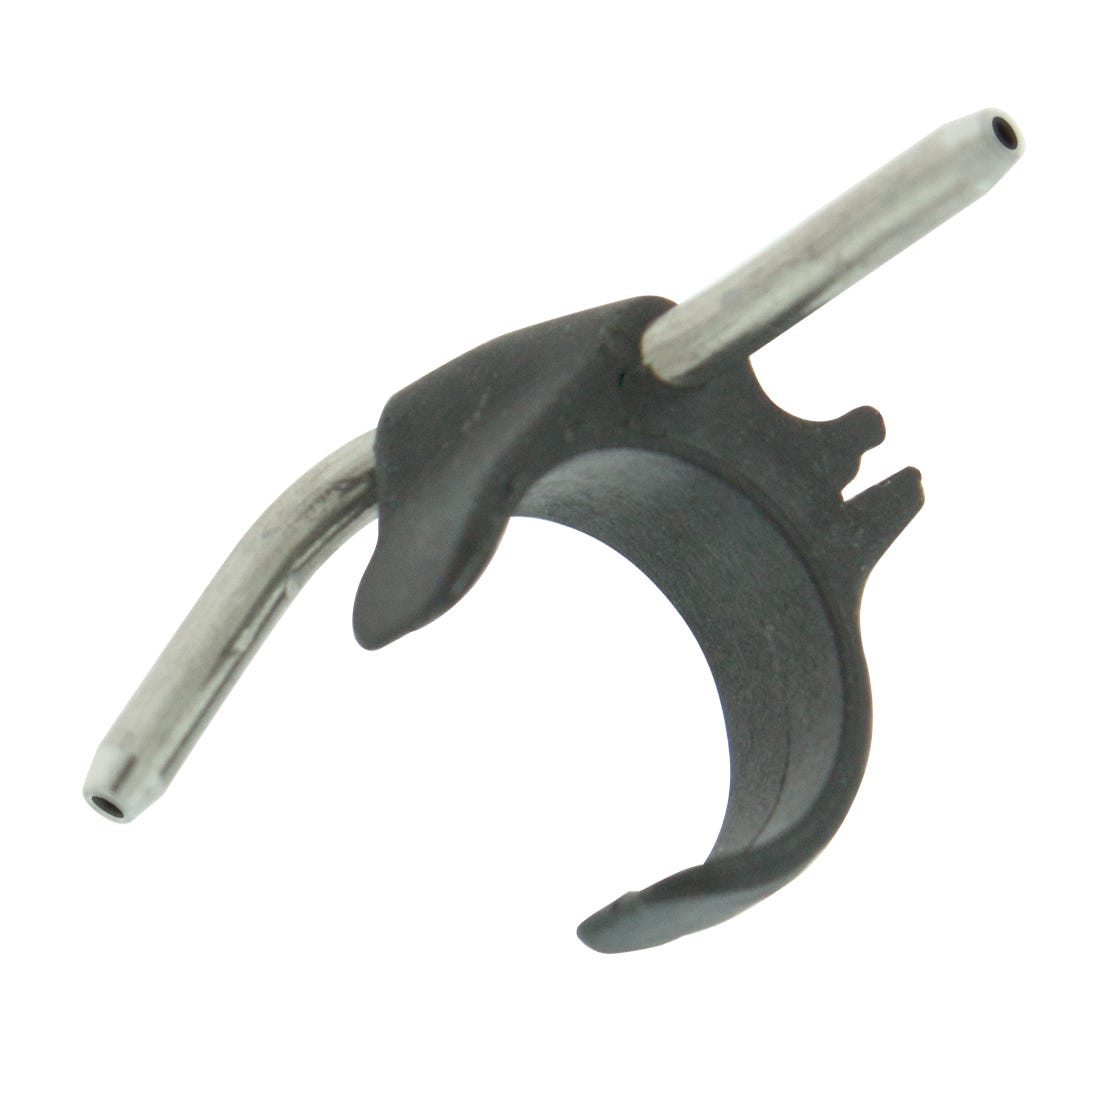 Irrigation Clip for W&H WI75, WS75 & WS75LED G Handpieces